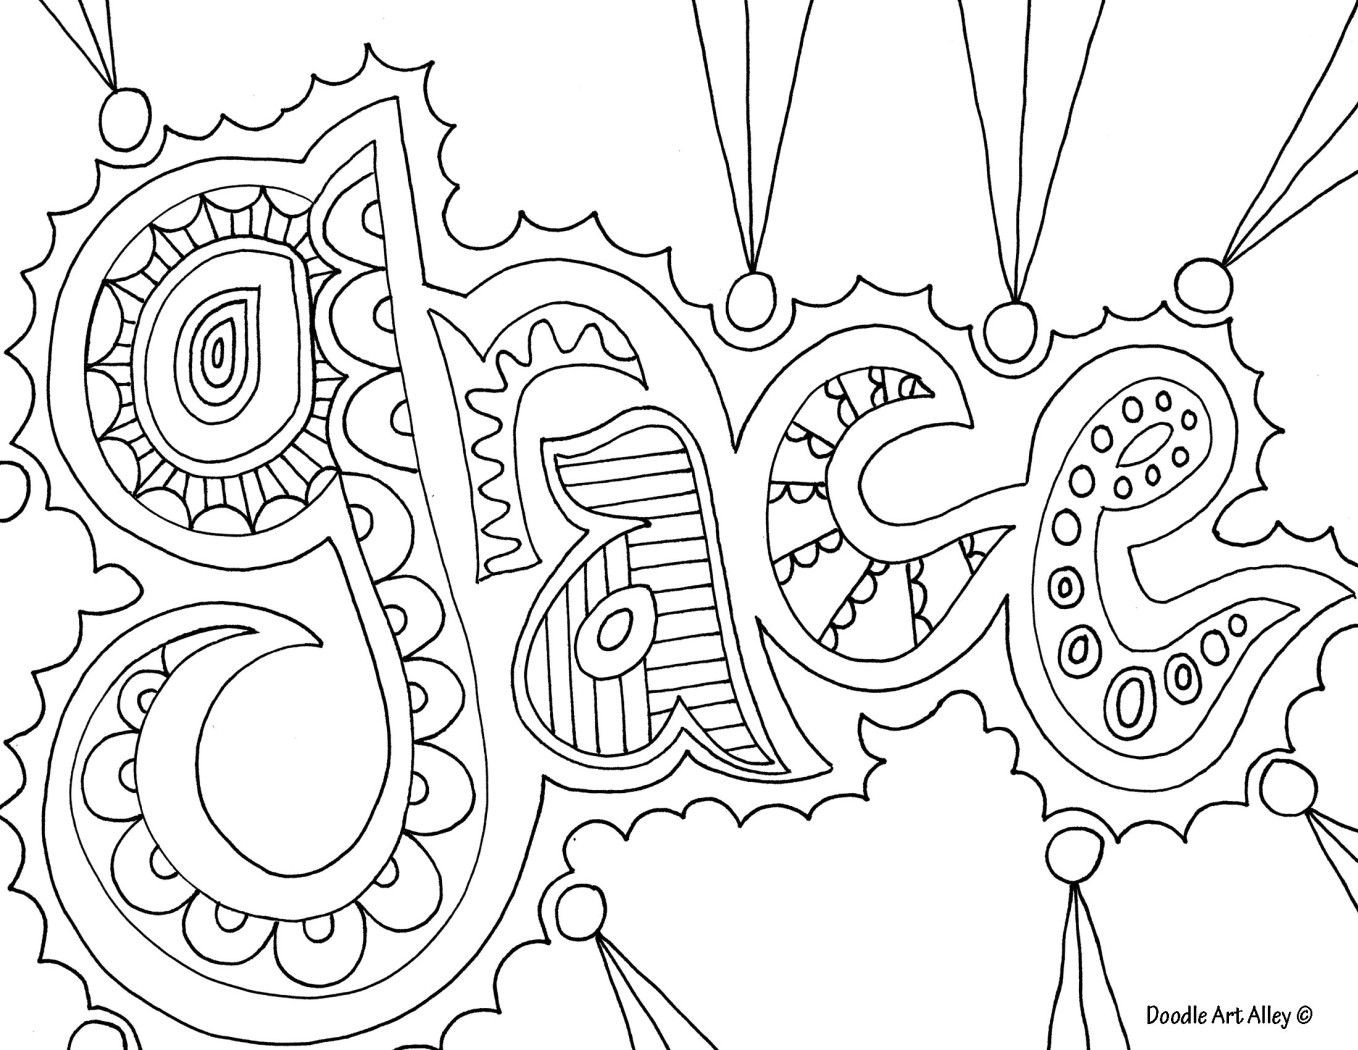 Coloring Pages For Teens With A C
 Doodle art grace nice coloring page for older kids